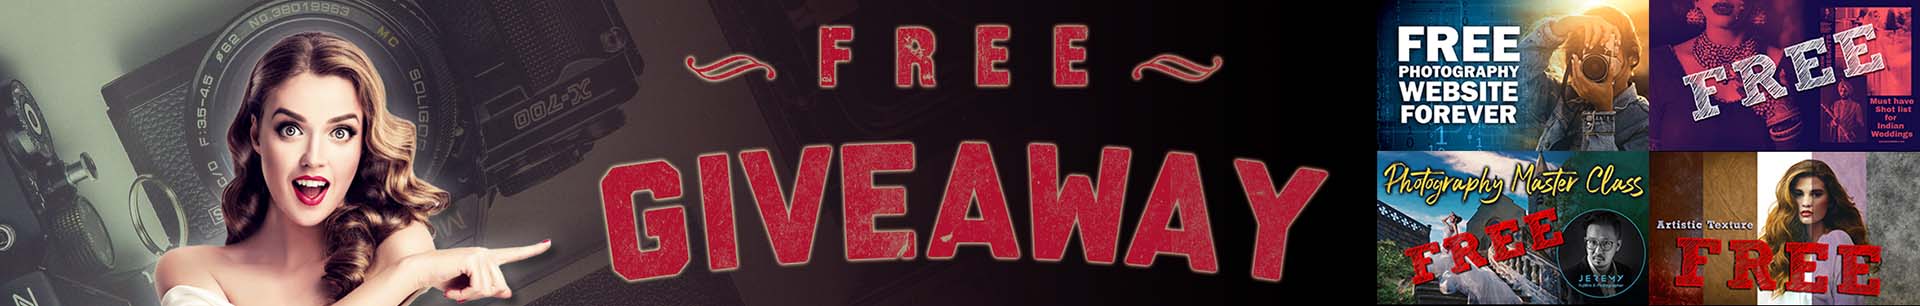 Freebies and Giveaways Contest and Raffles